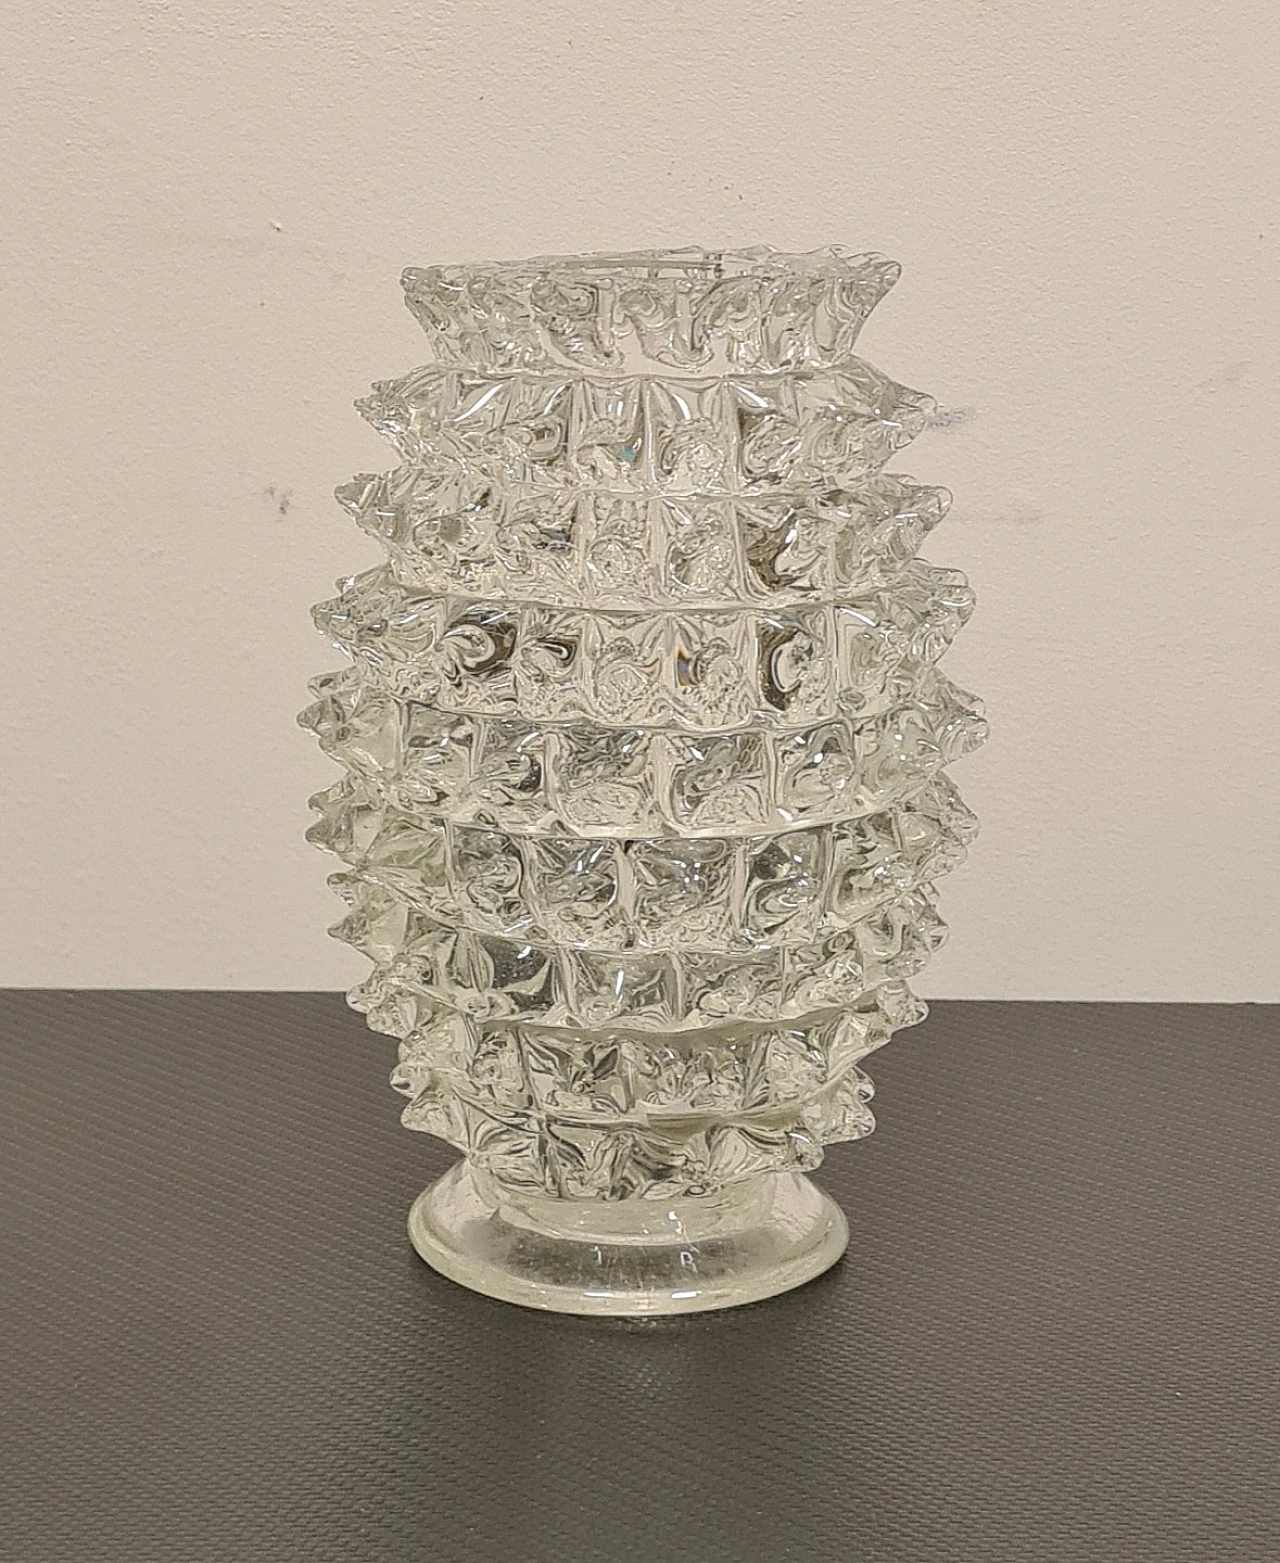 Rostered Murano glass vase by Barovier and Toso, 1940s 19